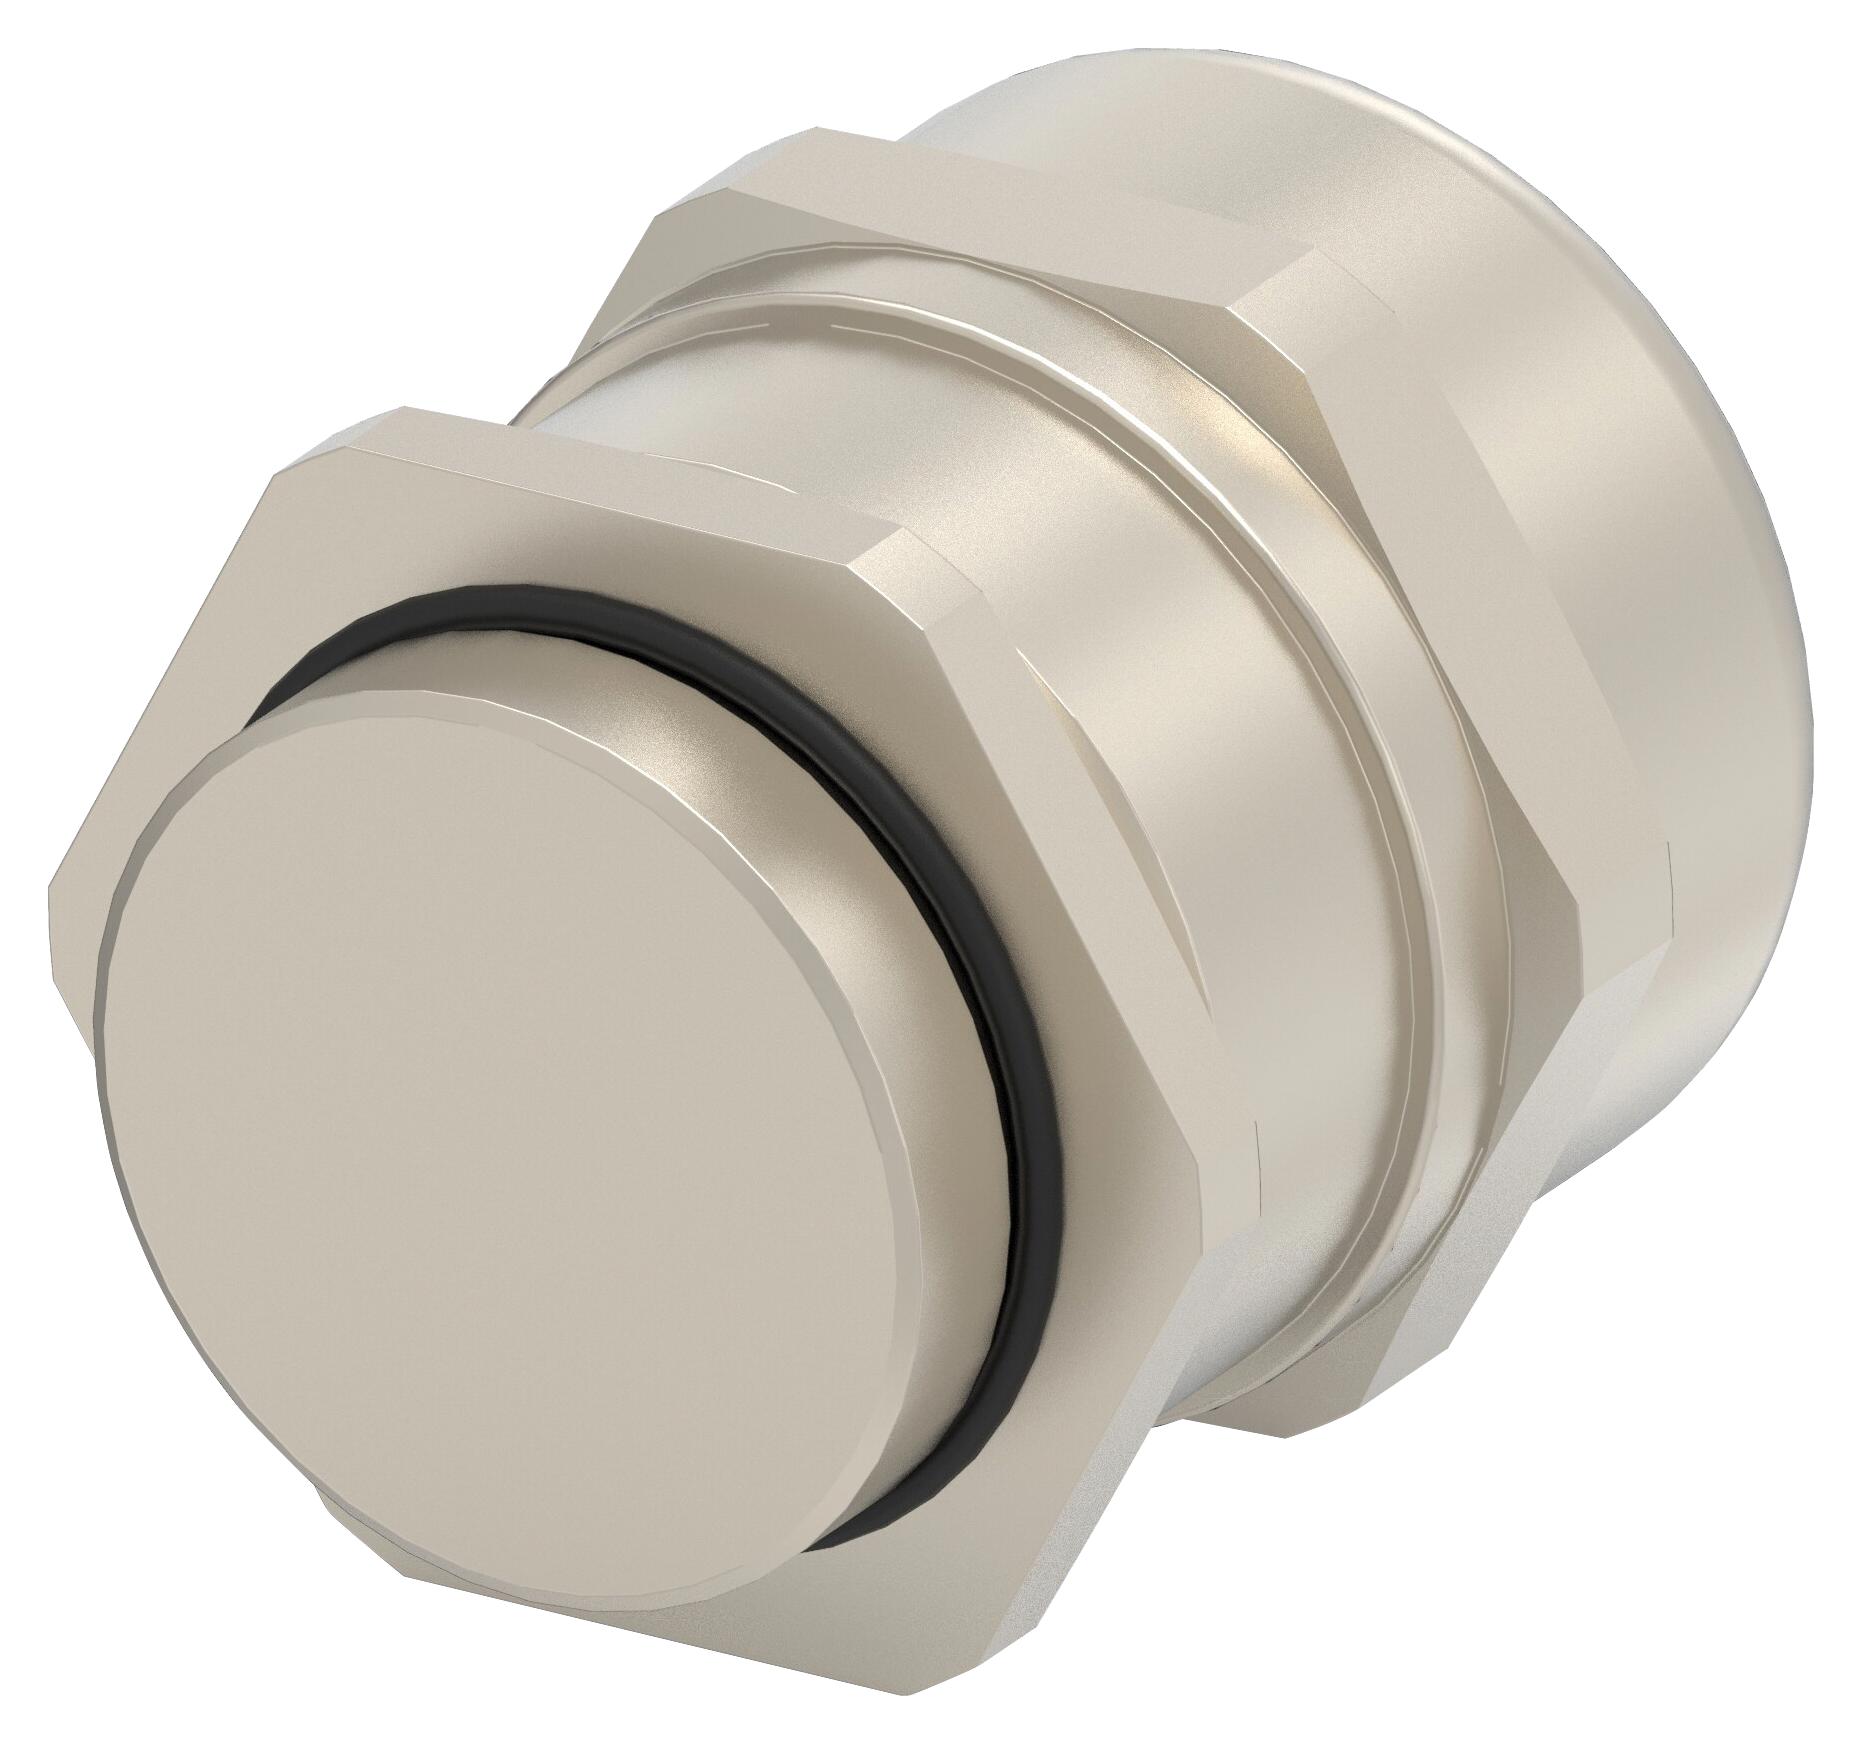 Entrelec TE Connectivity 1Sng625045R0000 Cable Gland, Brass, M40, 22-32mm